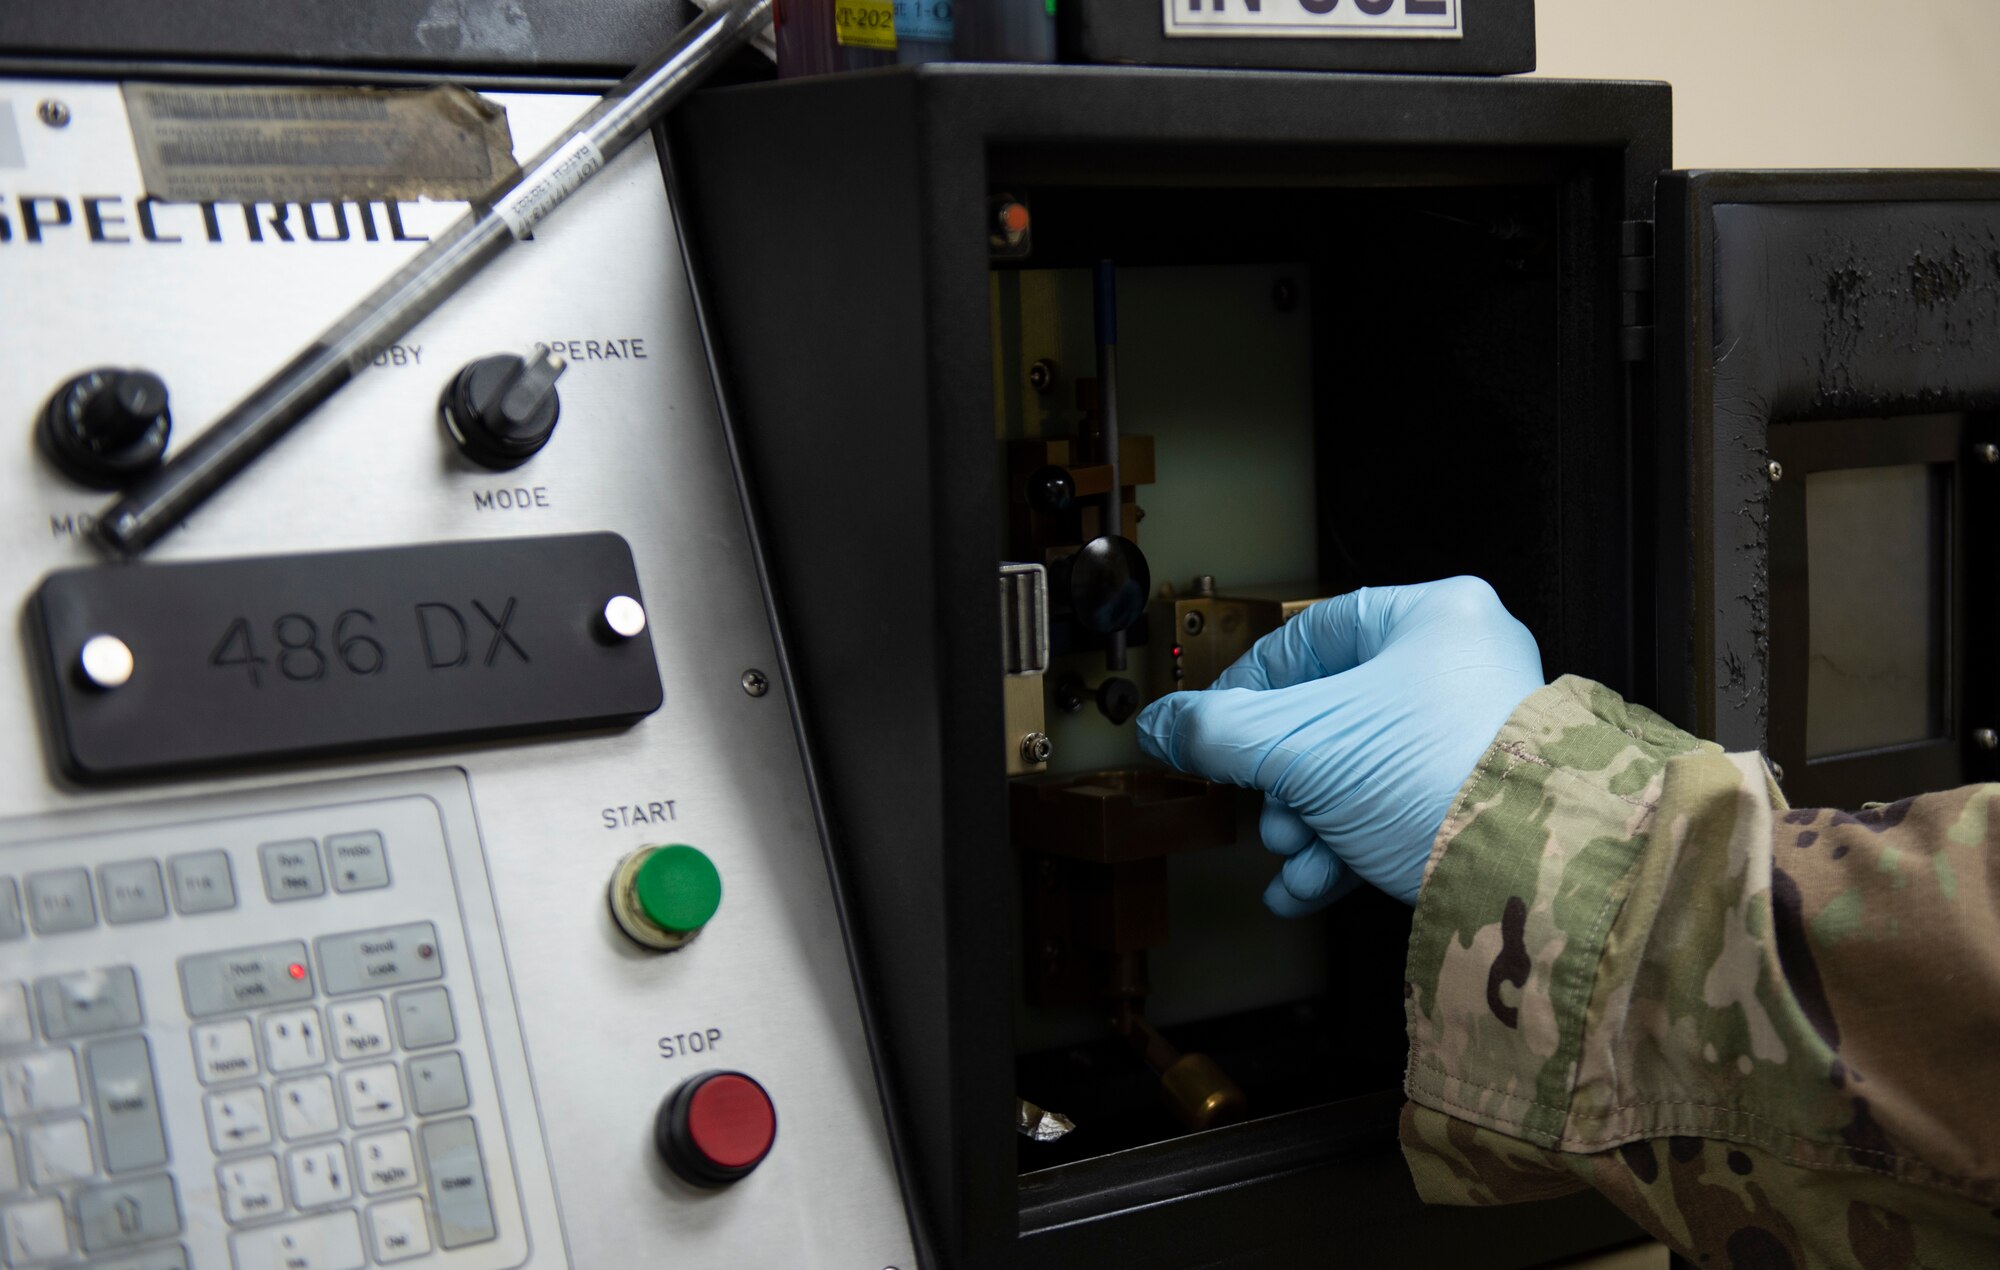 Tech. Sgt. Patrick Oliver, noncommissioned officer in charge of non-destructive inspections assigned to the 36th Maintenance Squadron puts in a sample to the Spectroil M oil analysis machine Oct. 22, 2020, at Andersen Air Force Base, Guam.